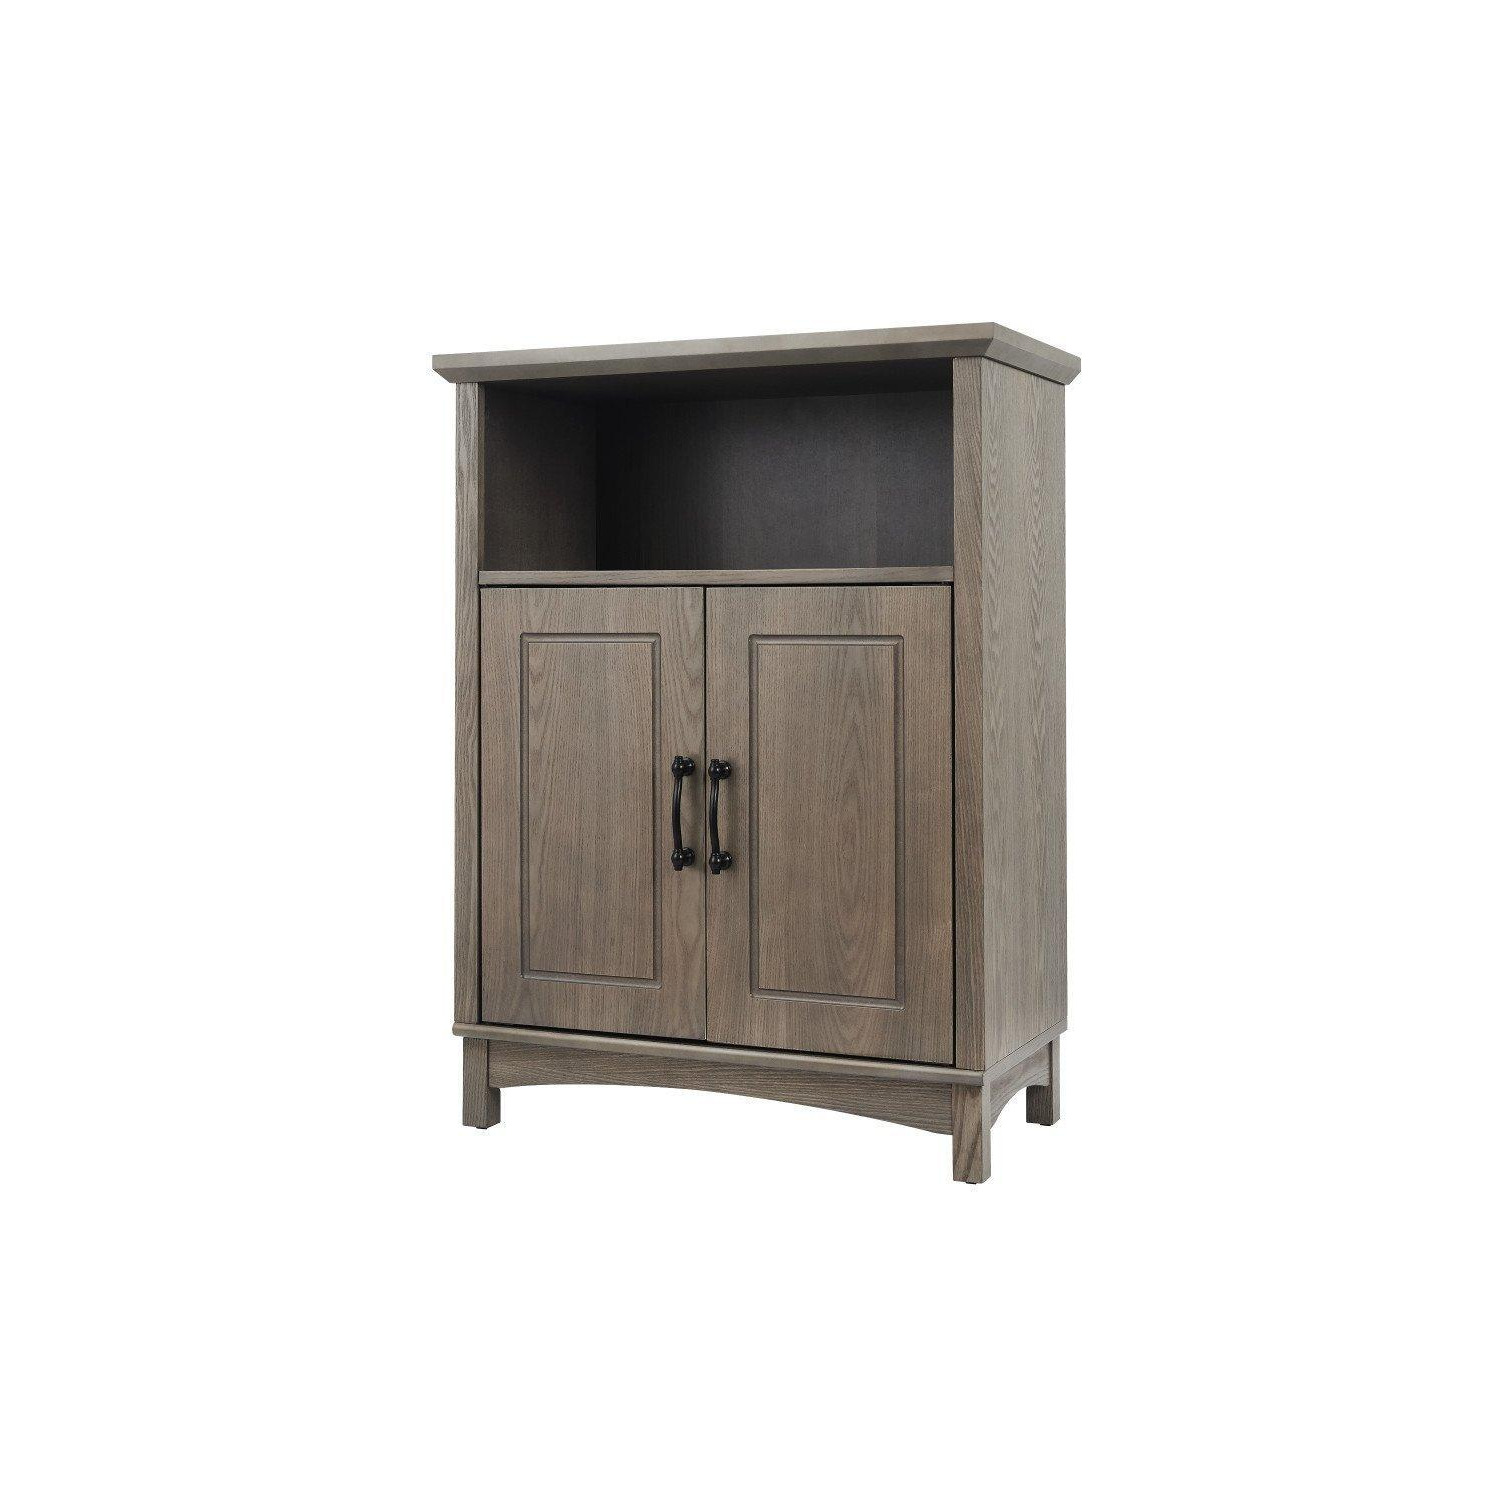 Russell Wooden Bathroom Free Standing Storage Cabinet - image 1